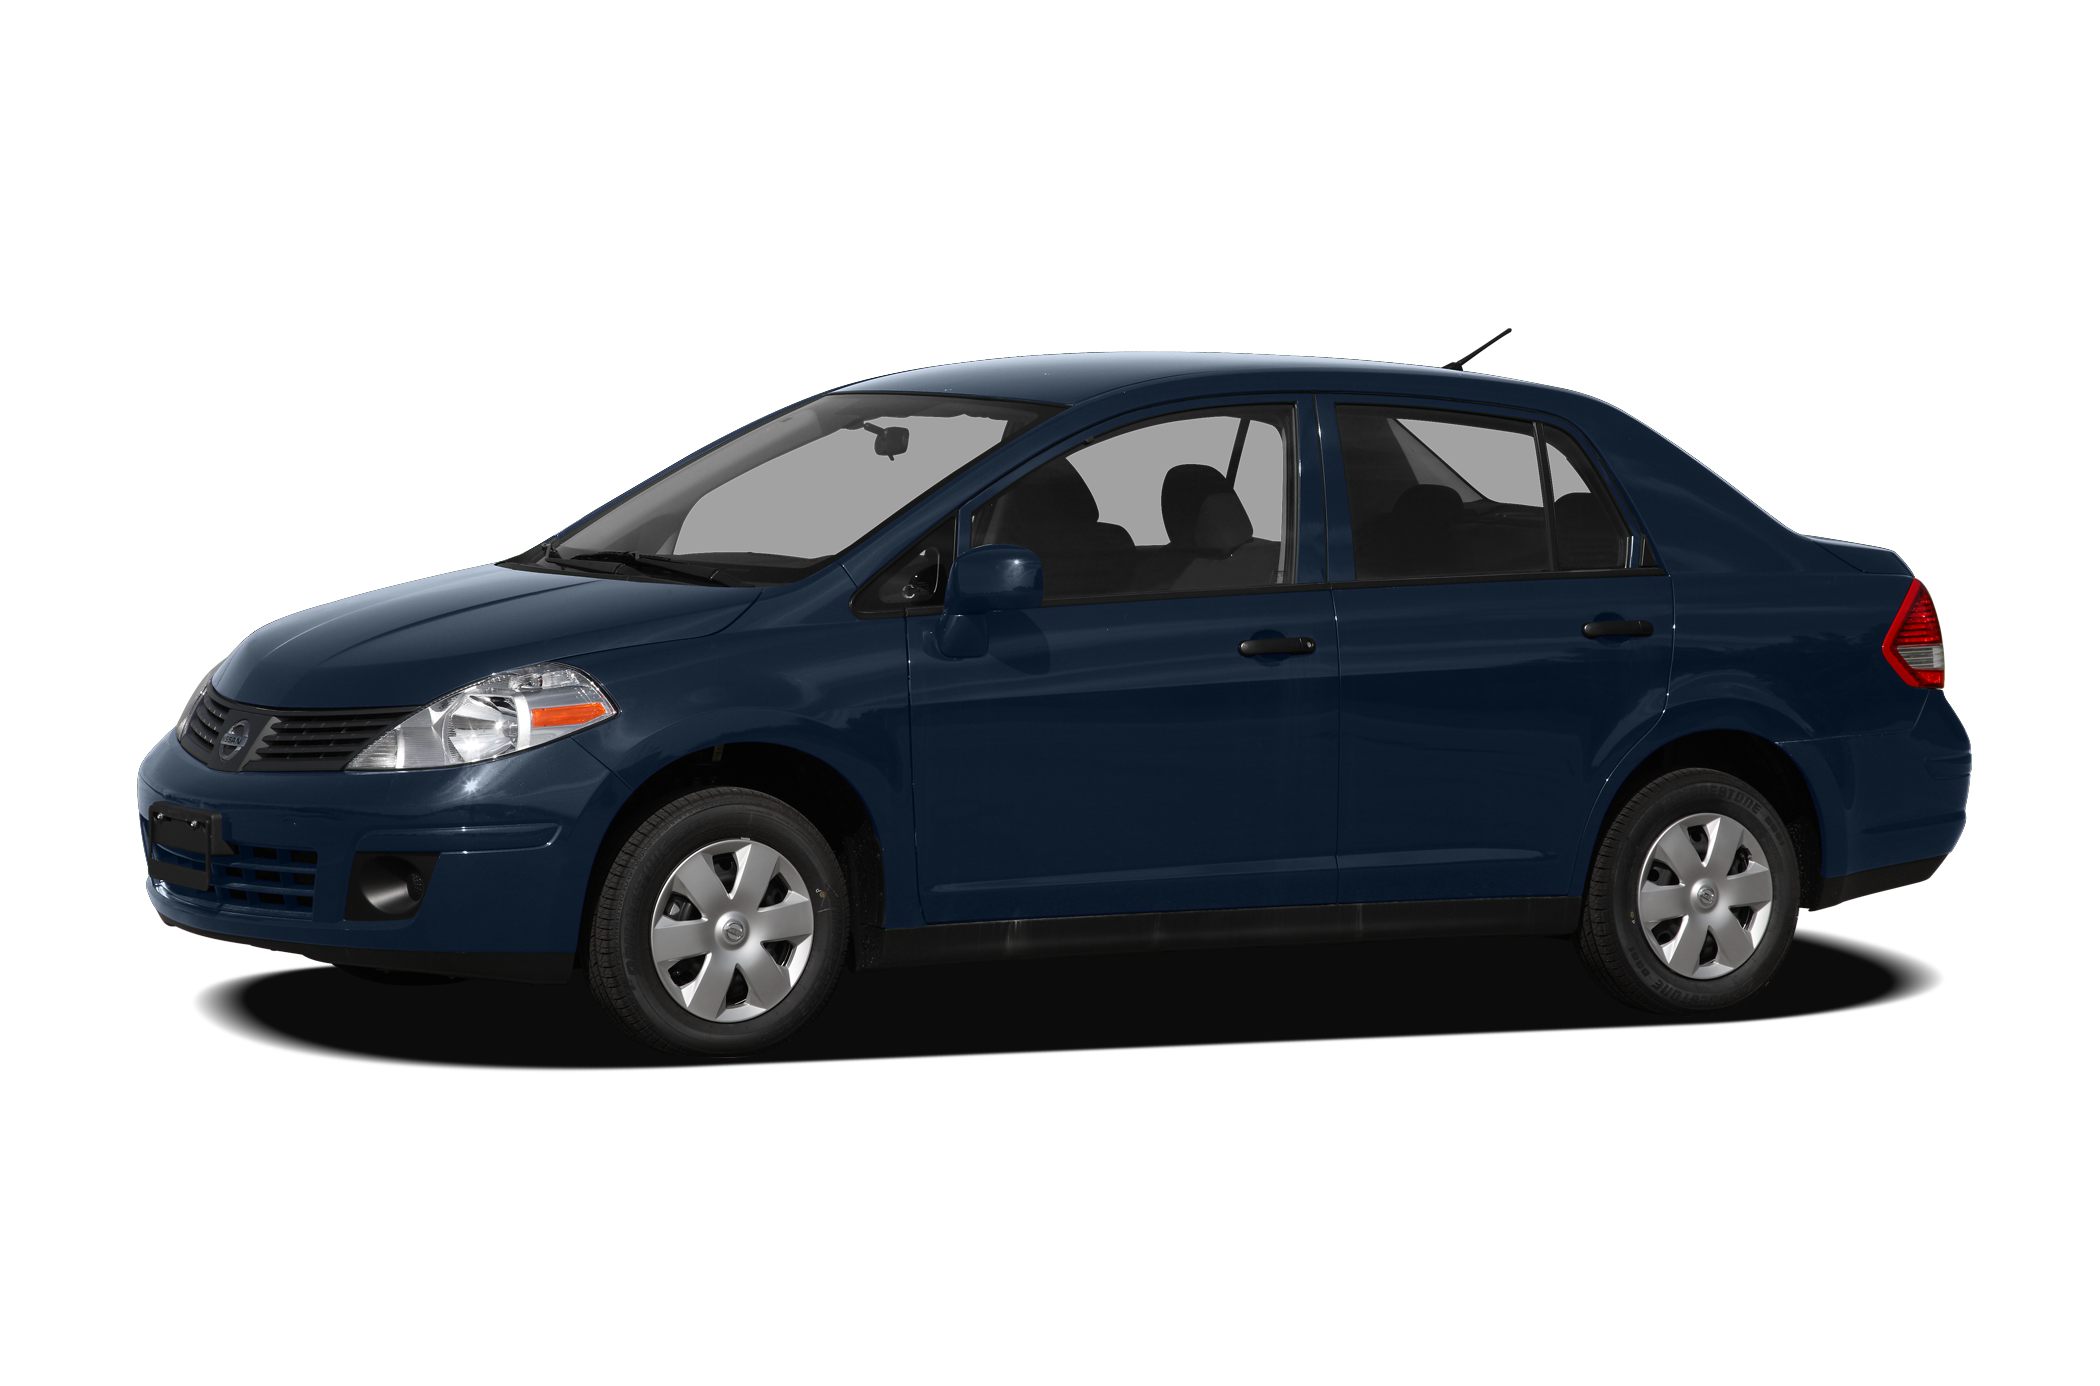 2011 Nissan versa cost of ownership #2